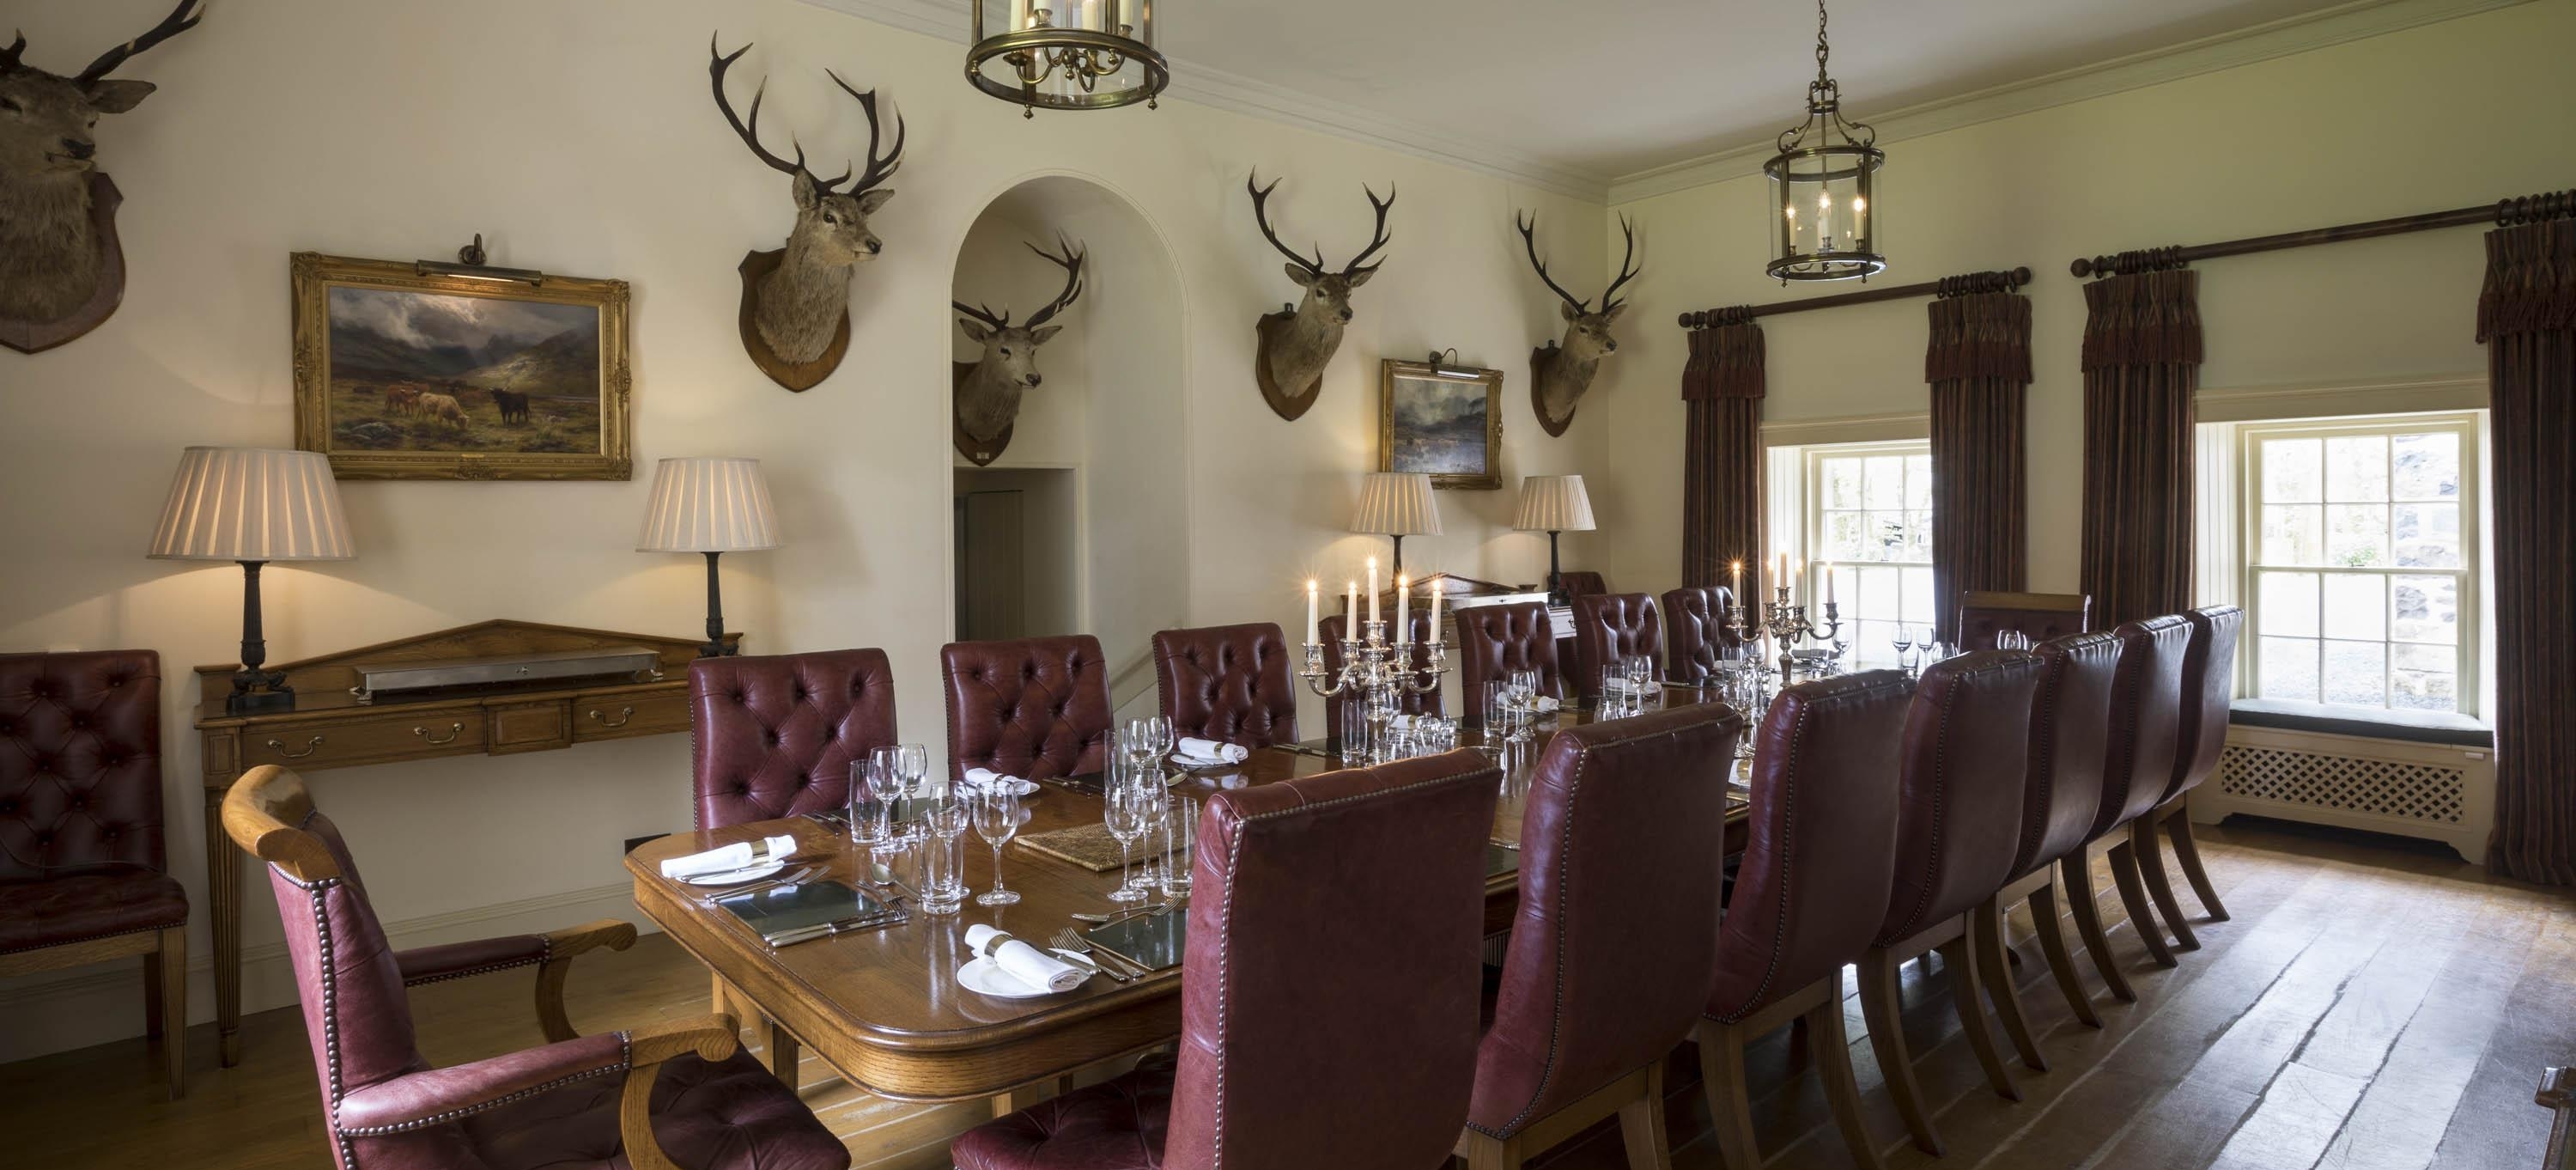 Traditional dining room in a Scottish country house. Stags heads, fireplace, large dining table with leather backed chairs.